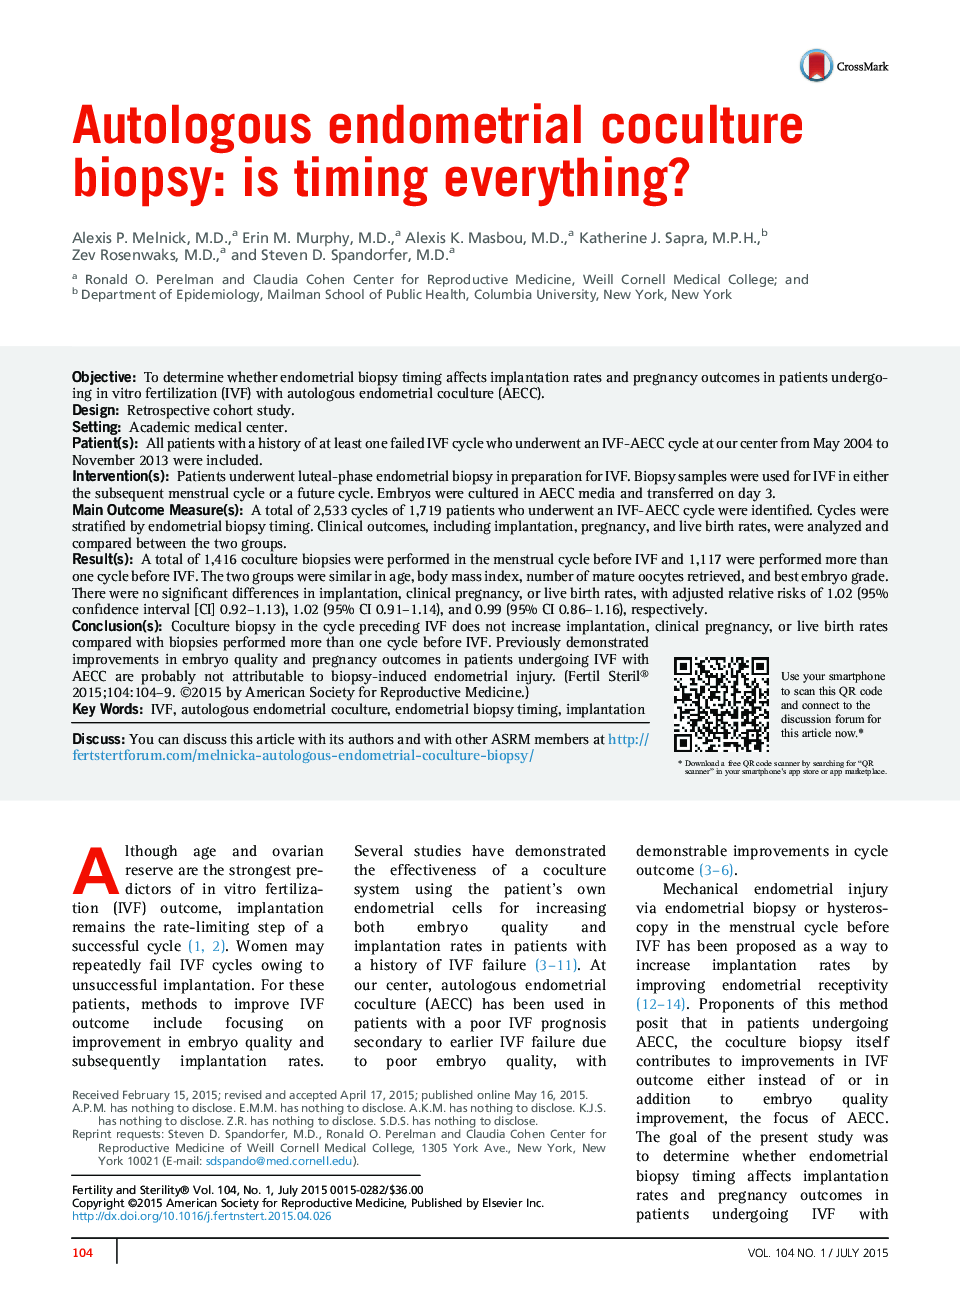 Autologous endometrial coculture biopsy: is timing everything?